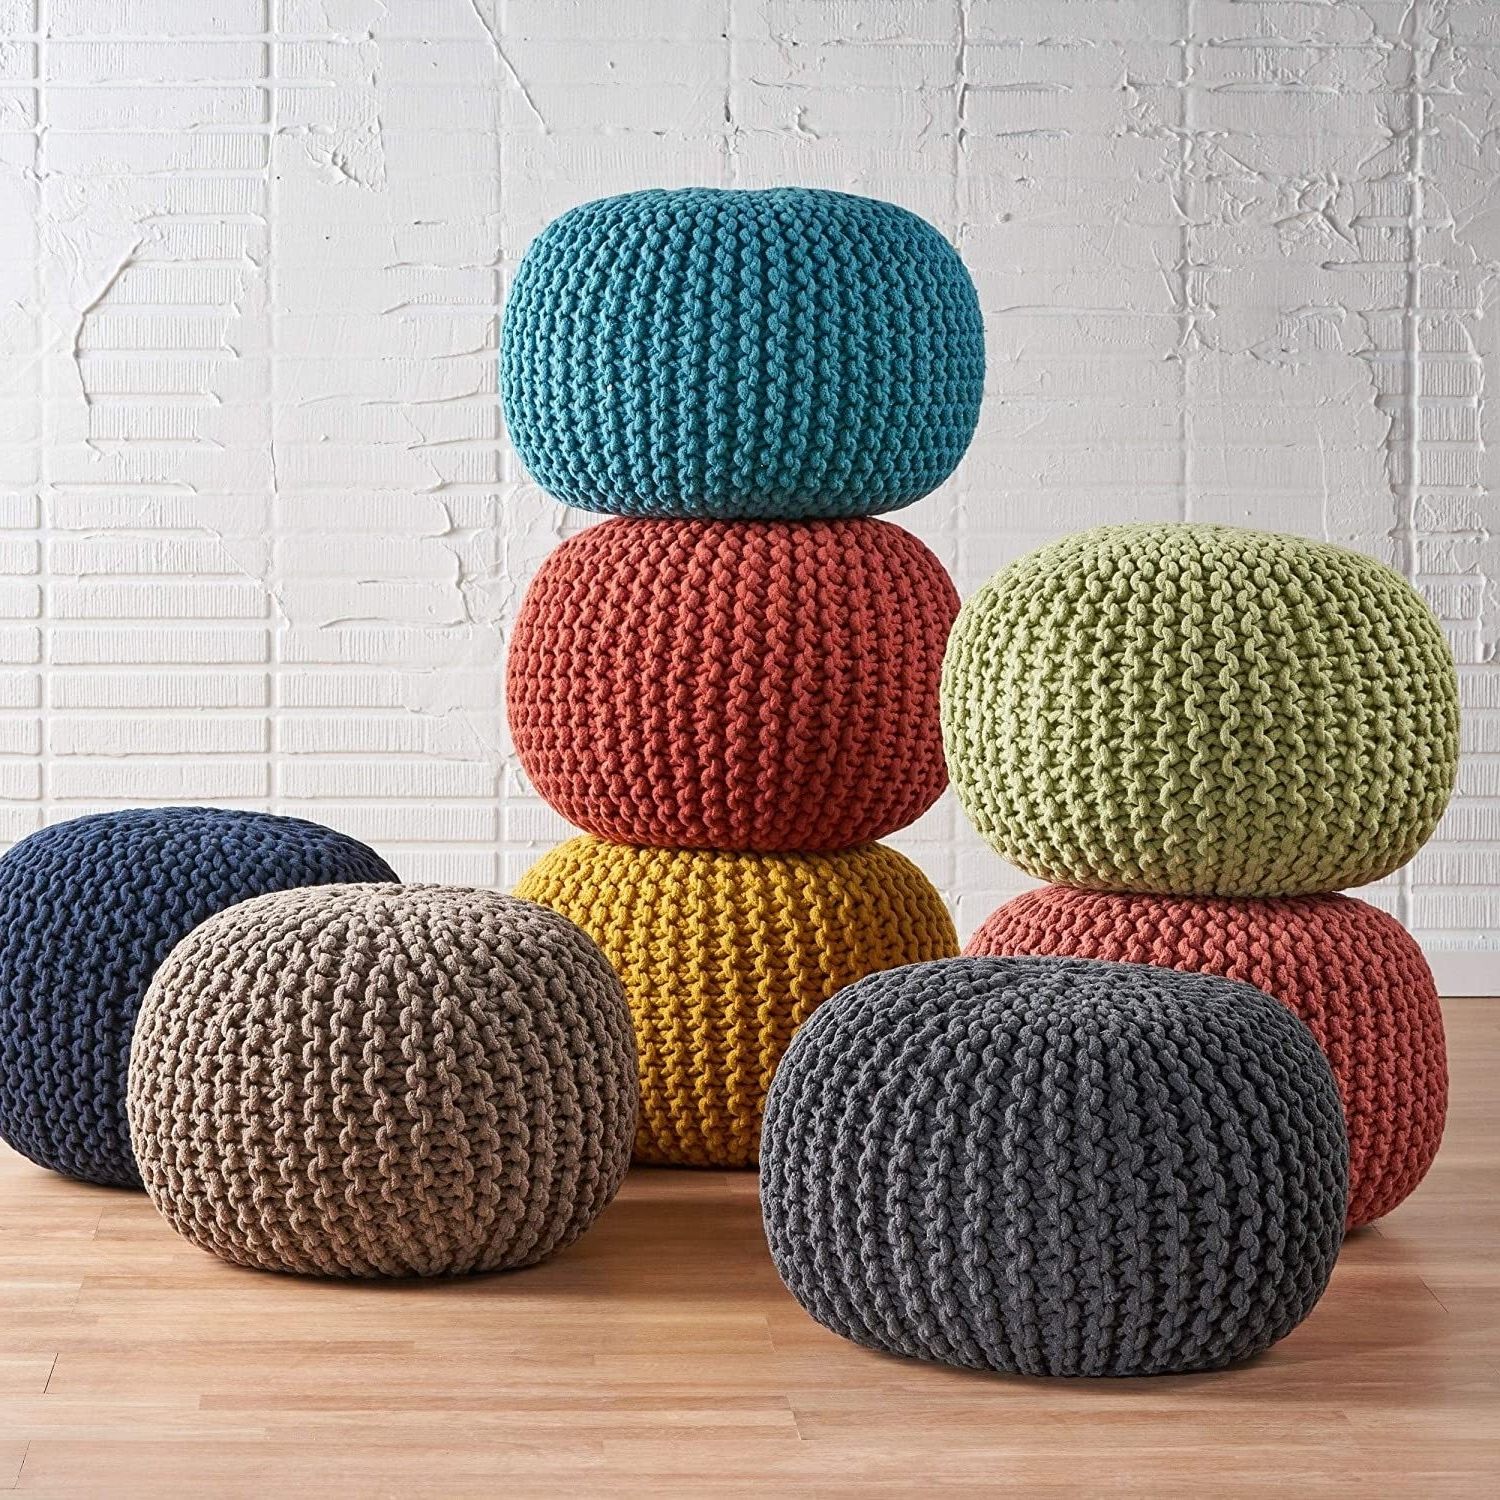 Most Up To Date Ottomans & Poufs For 2020 – Ideas On Foter Within Black And Natural Cotton Pouf Ottomans (View 8 of 10)